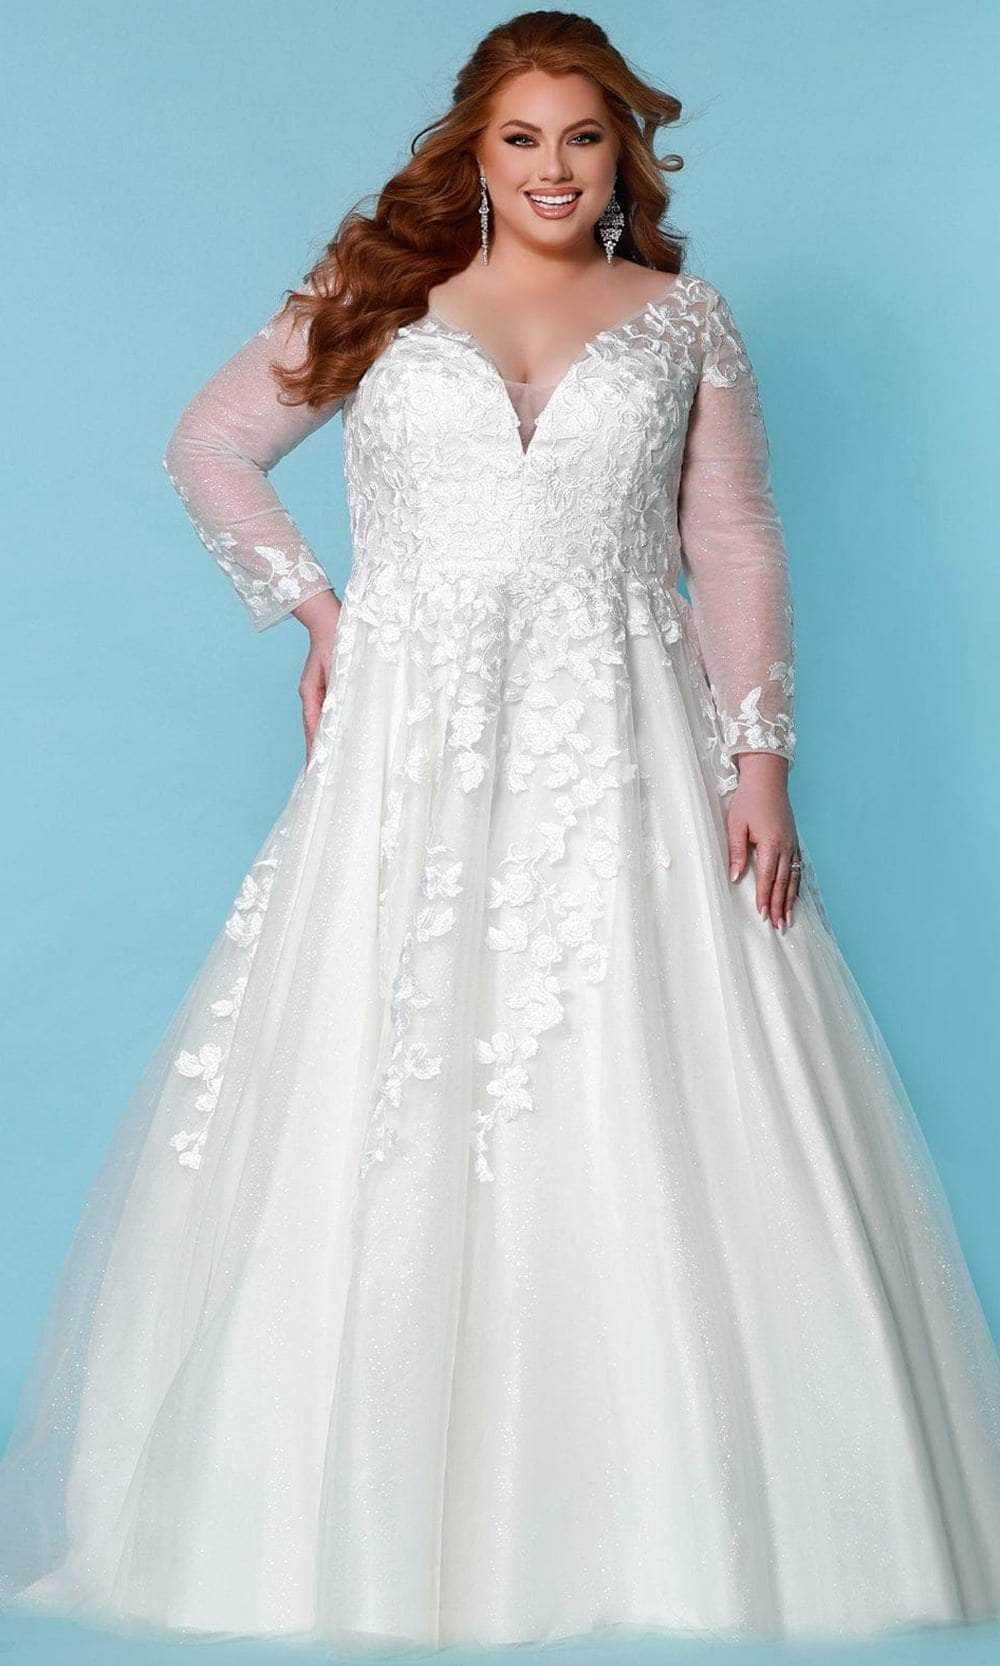 Sydney's Closet Bridal, Sydney's Closet Bridal - SC5267 Embroidered Glitter Bridal Gown